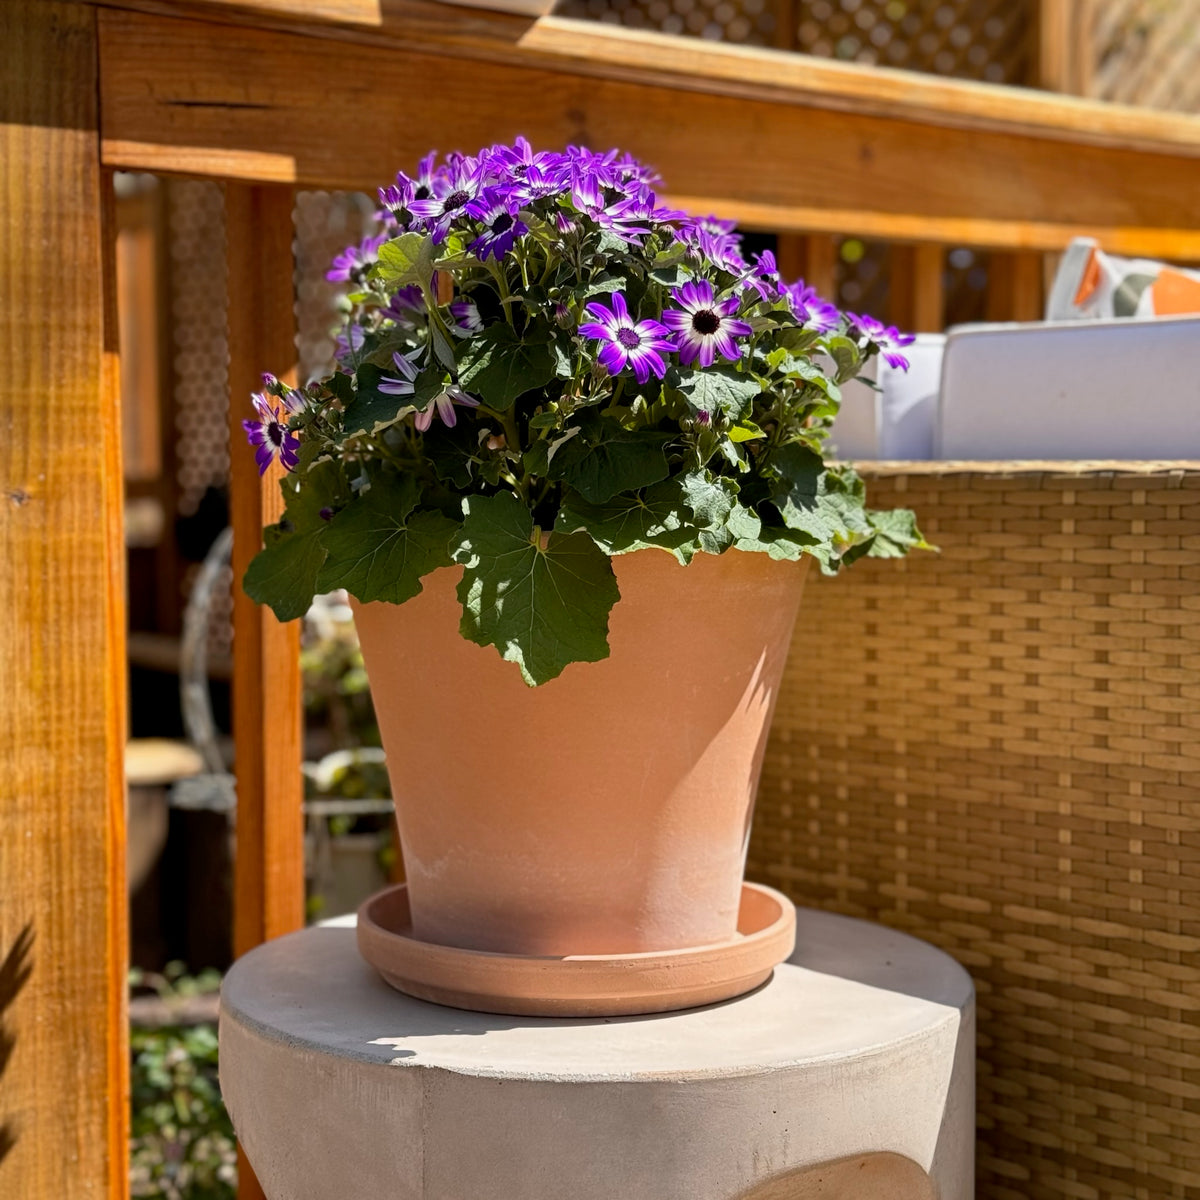 Everly Terracotta Pot With Saucer - Small - Holistic Habitat 